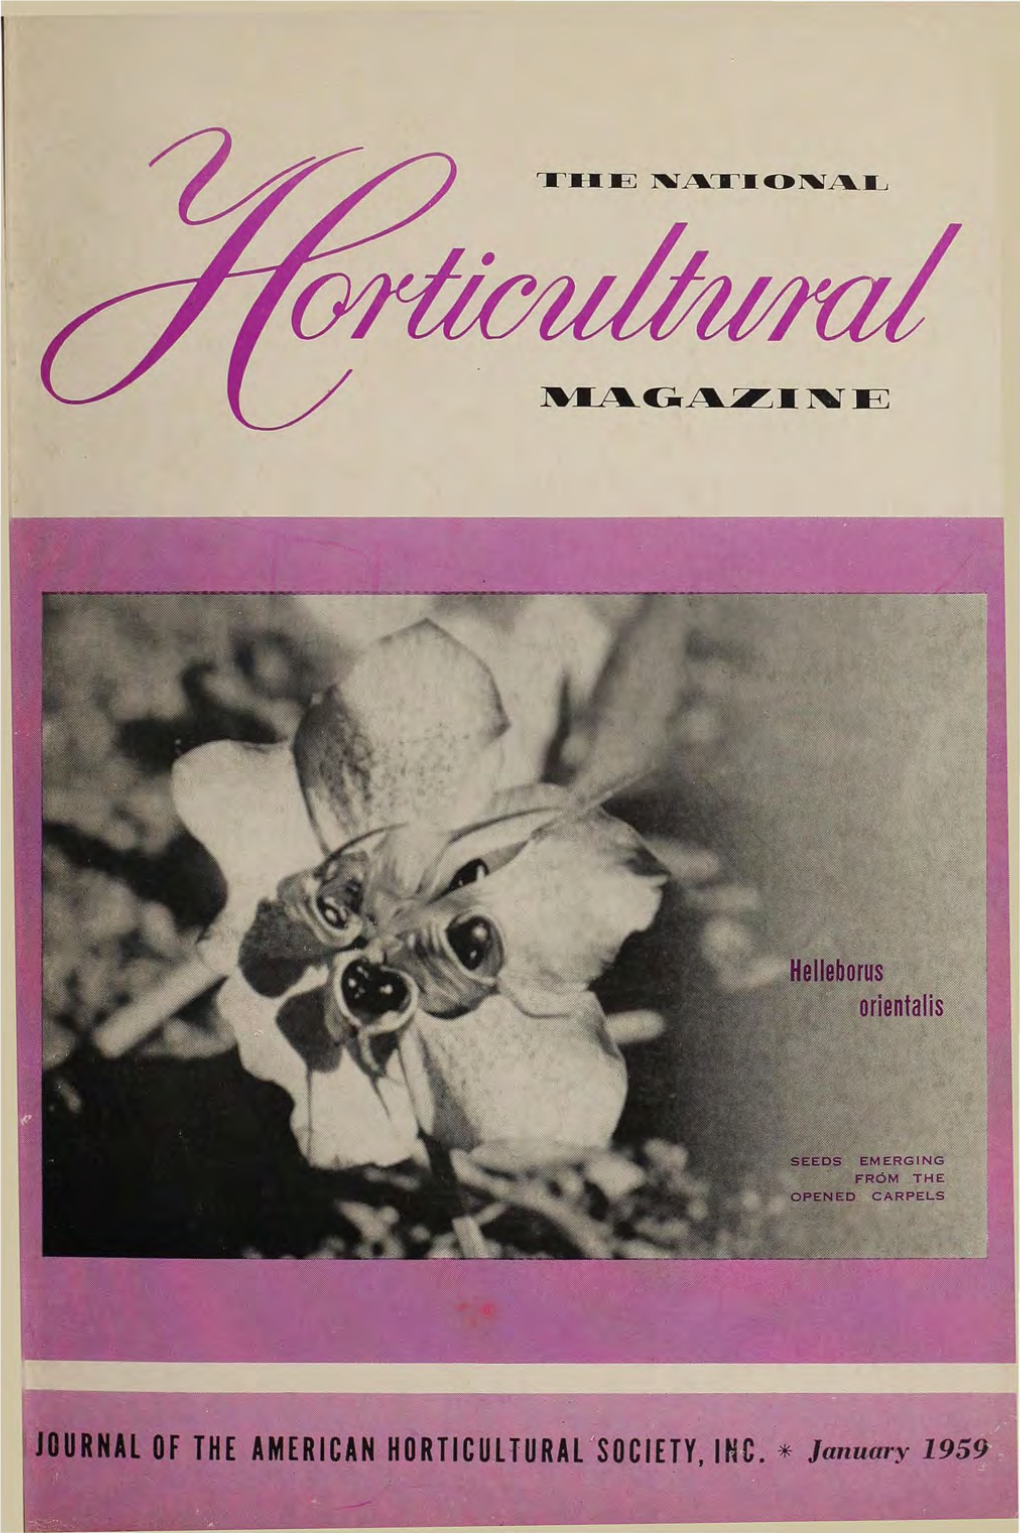 January 1959 the National HORTICULTURAL Magazine